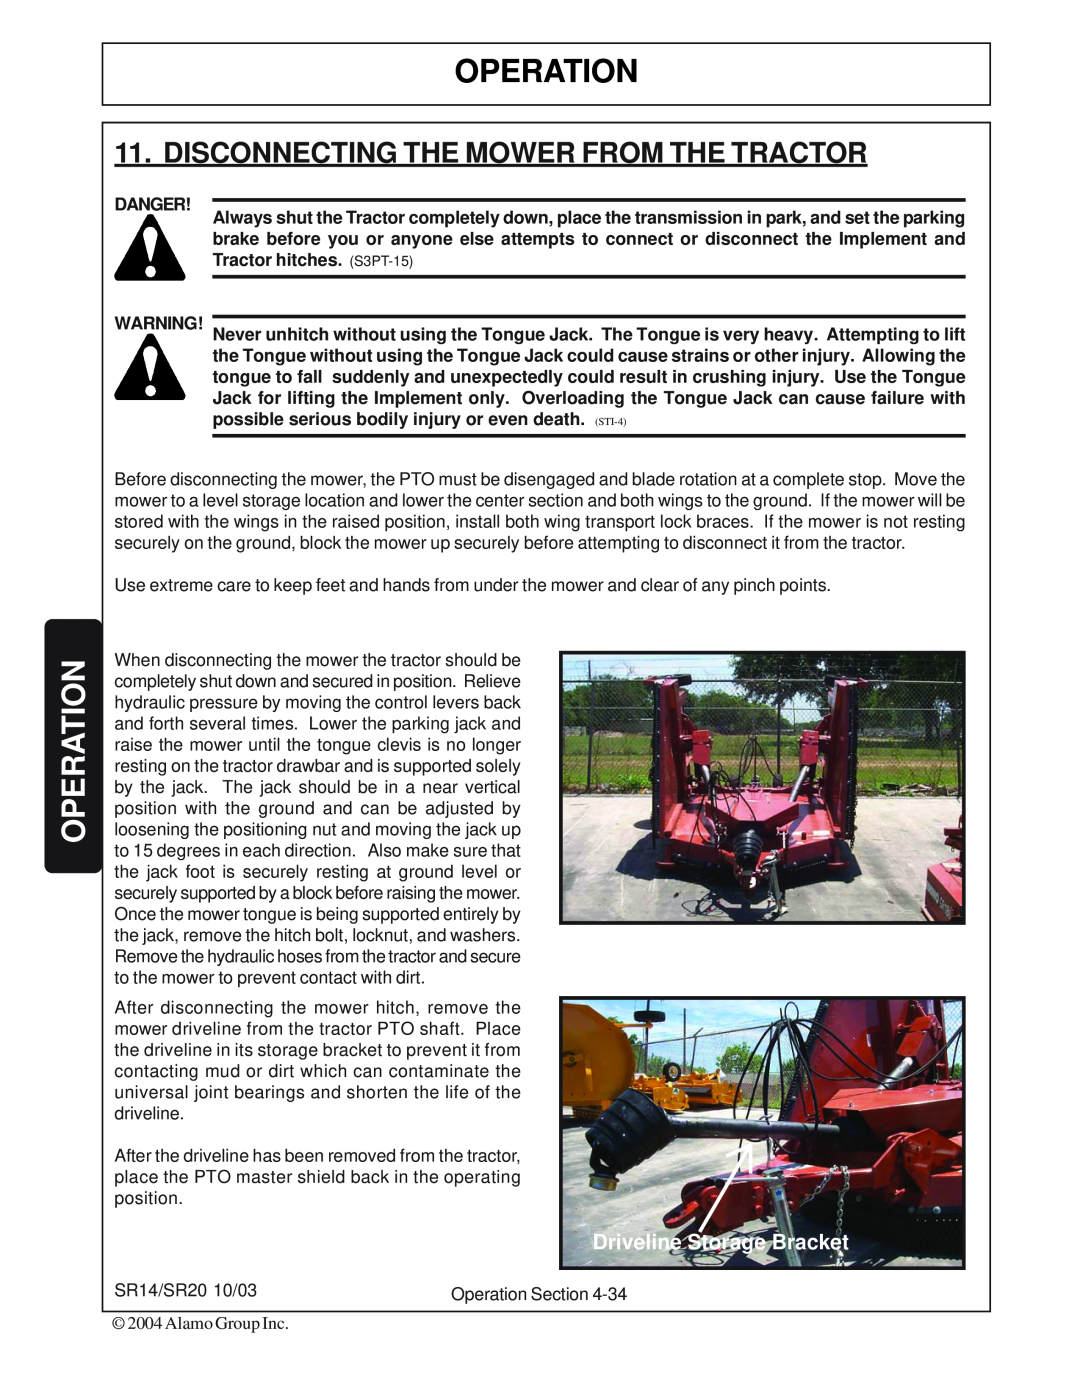 Alamo SR20, SR14 manual Disconnecting The Mower From The Tractor, Operation, Driveline Storage Bracket, Danger 